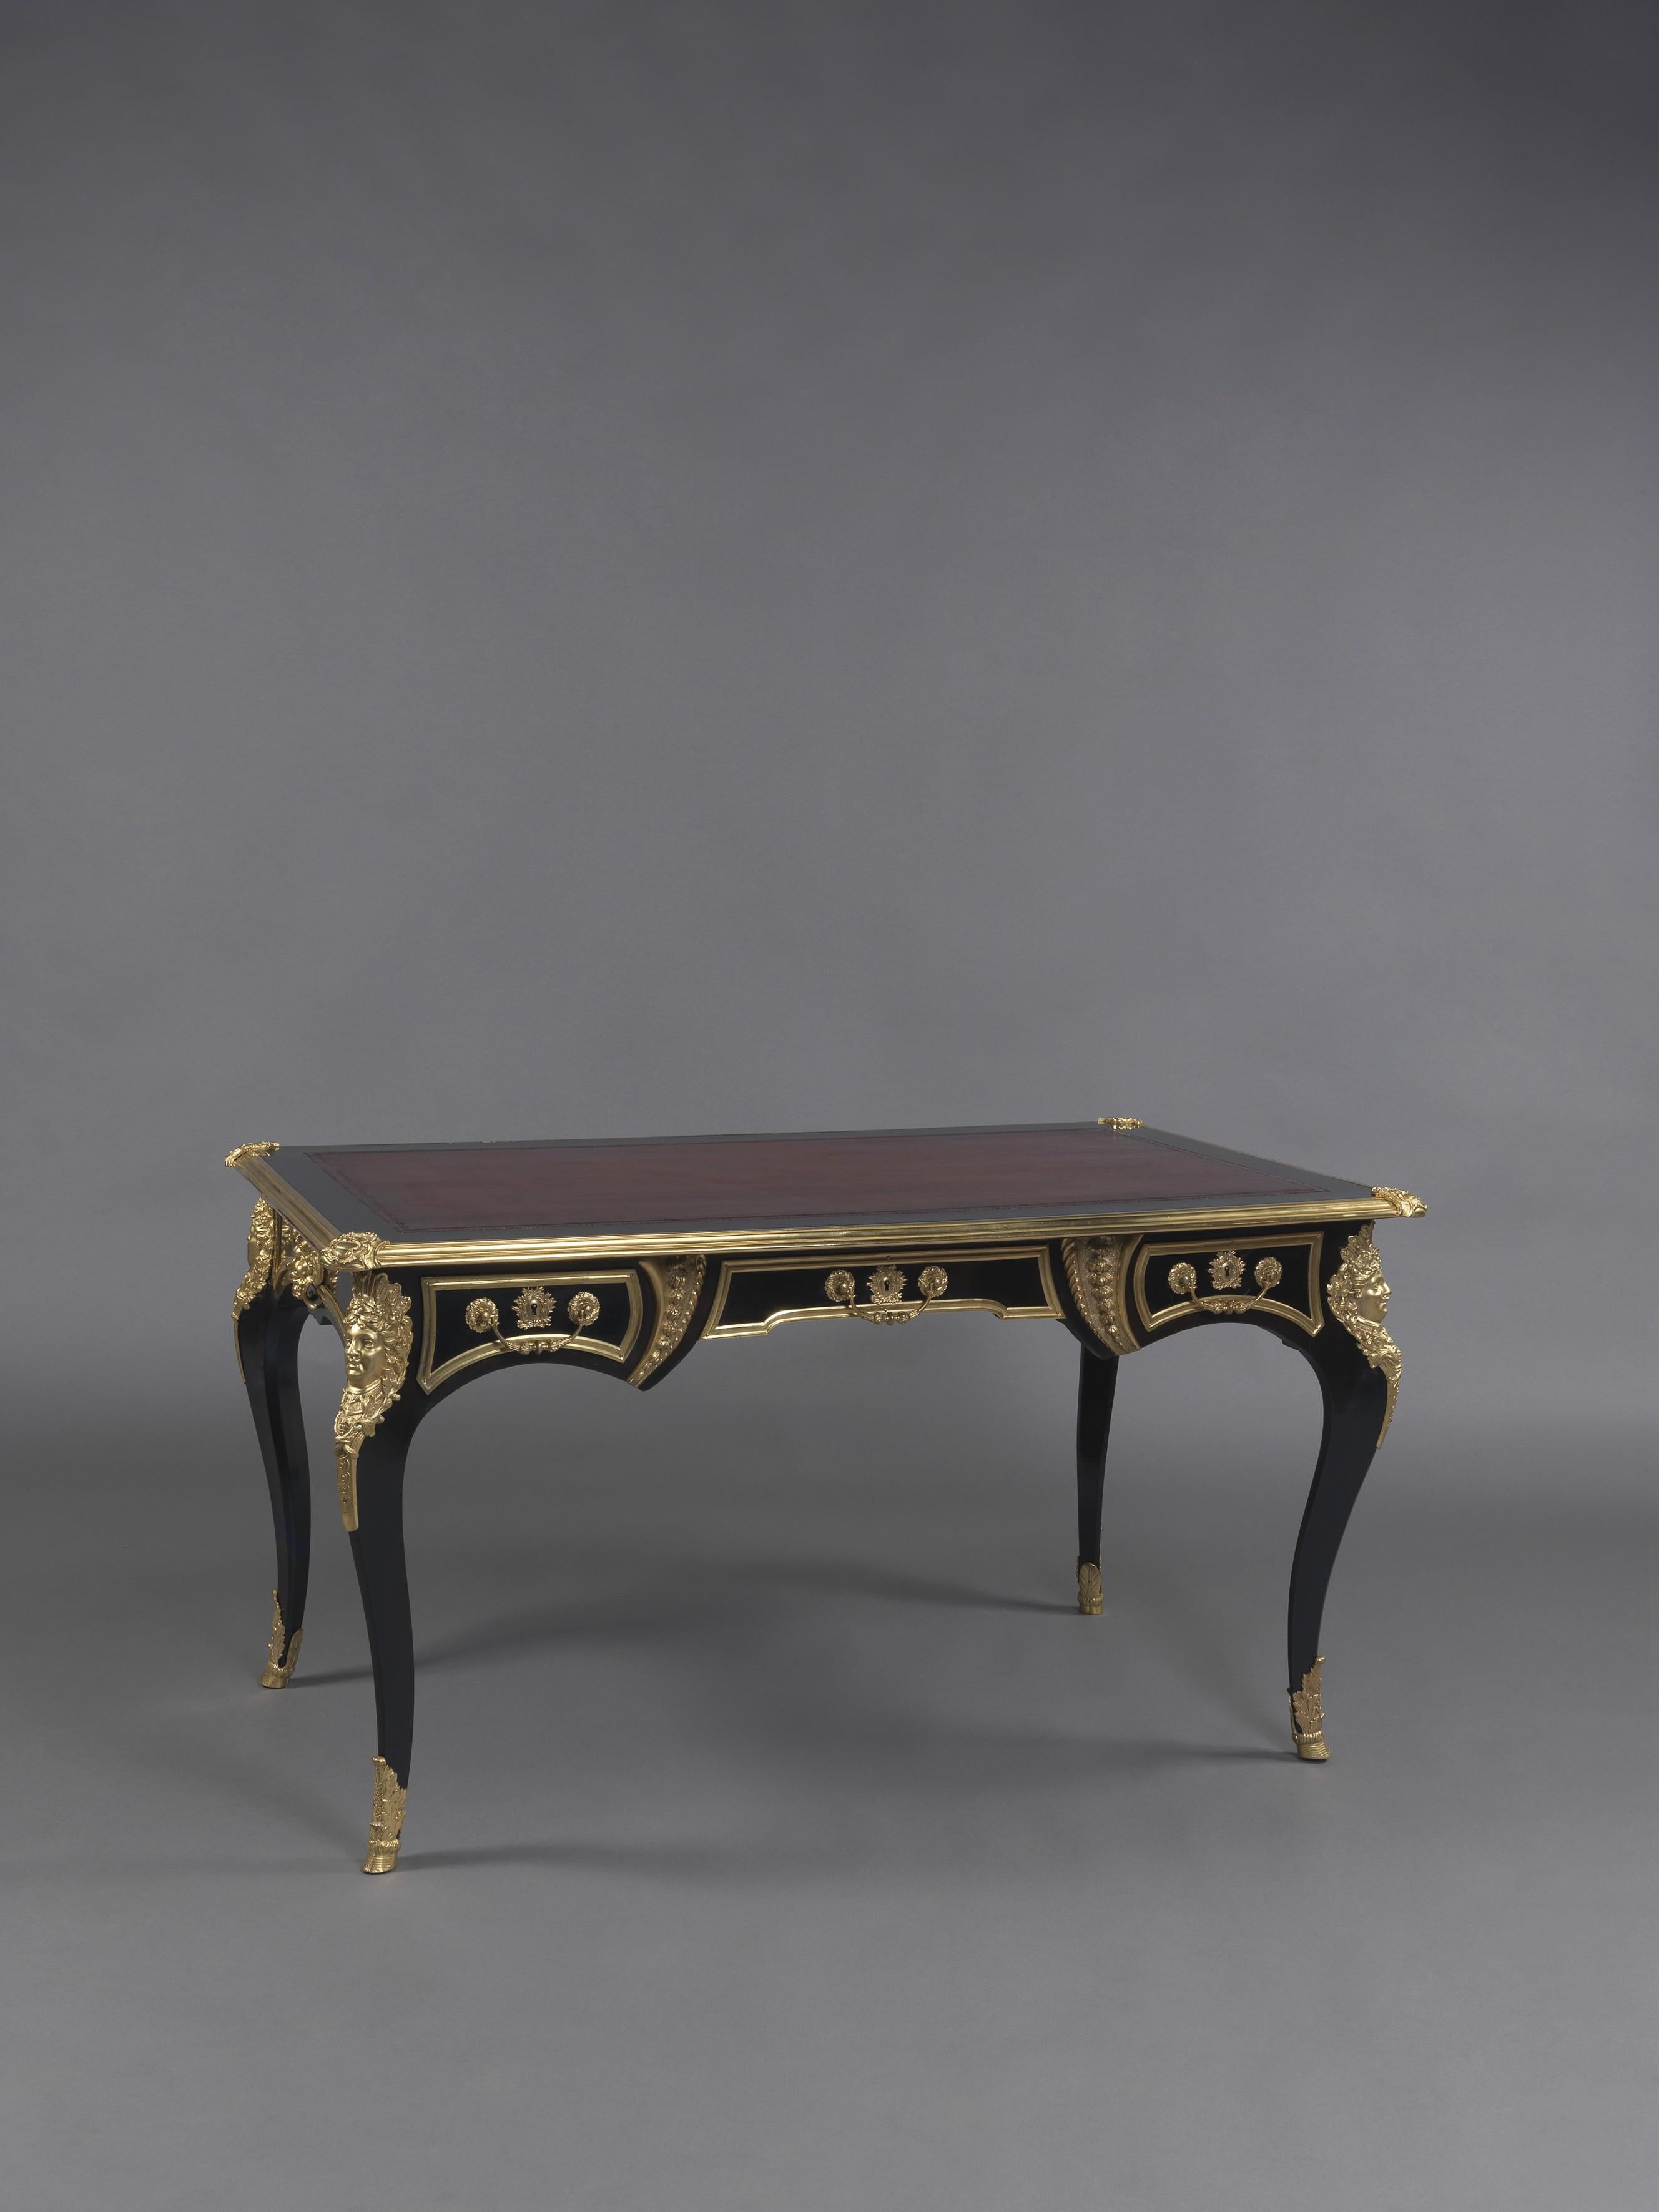 A fine Regence style ebonised and gilt-bronze mounted bureau plat by Sormani.

Paris, circa 1880.

The central drawer bearing a label for ‘VVE P. SORMANI & FILS 10, r. Charlot Paris’. 

Born in Venice in 1817, Paul Sormani (1817-1877), was a